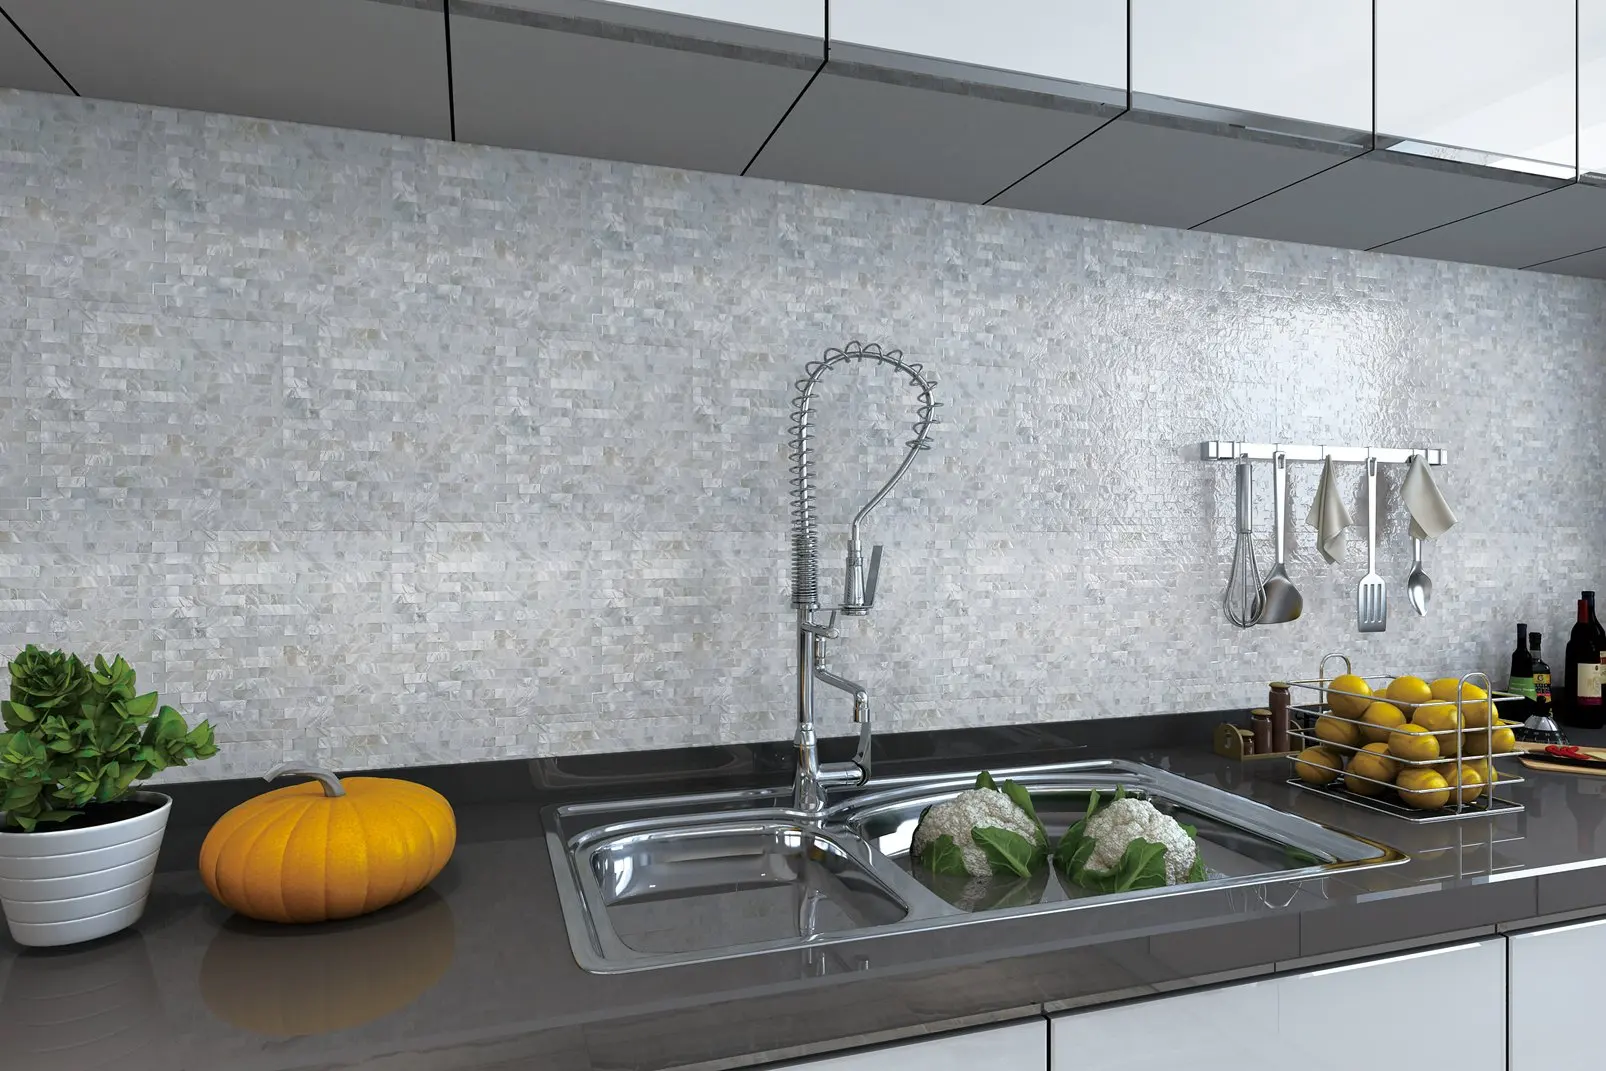 Peel and Stick Mother of Pearl Shell Tile Backsplash Kitchen Backsplash Peel and Stick in White Shell 12X12, 5 Sheets